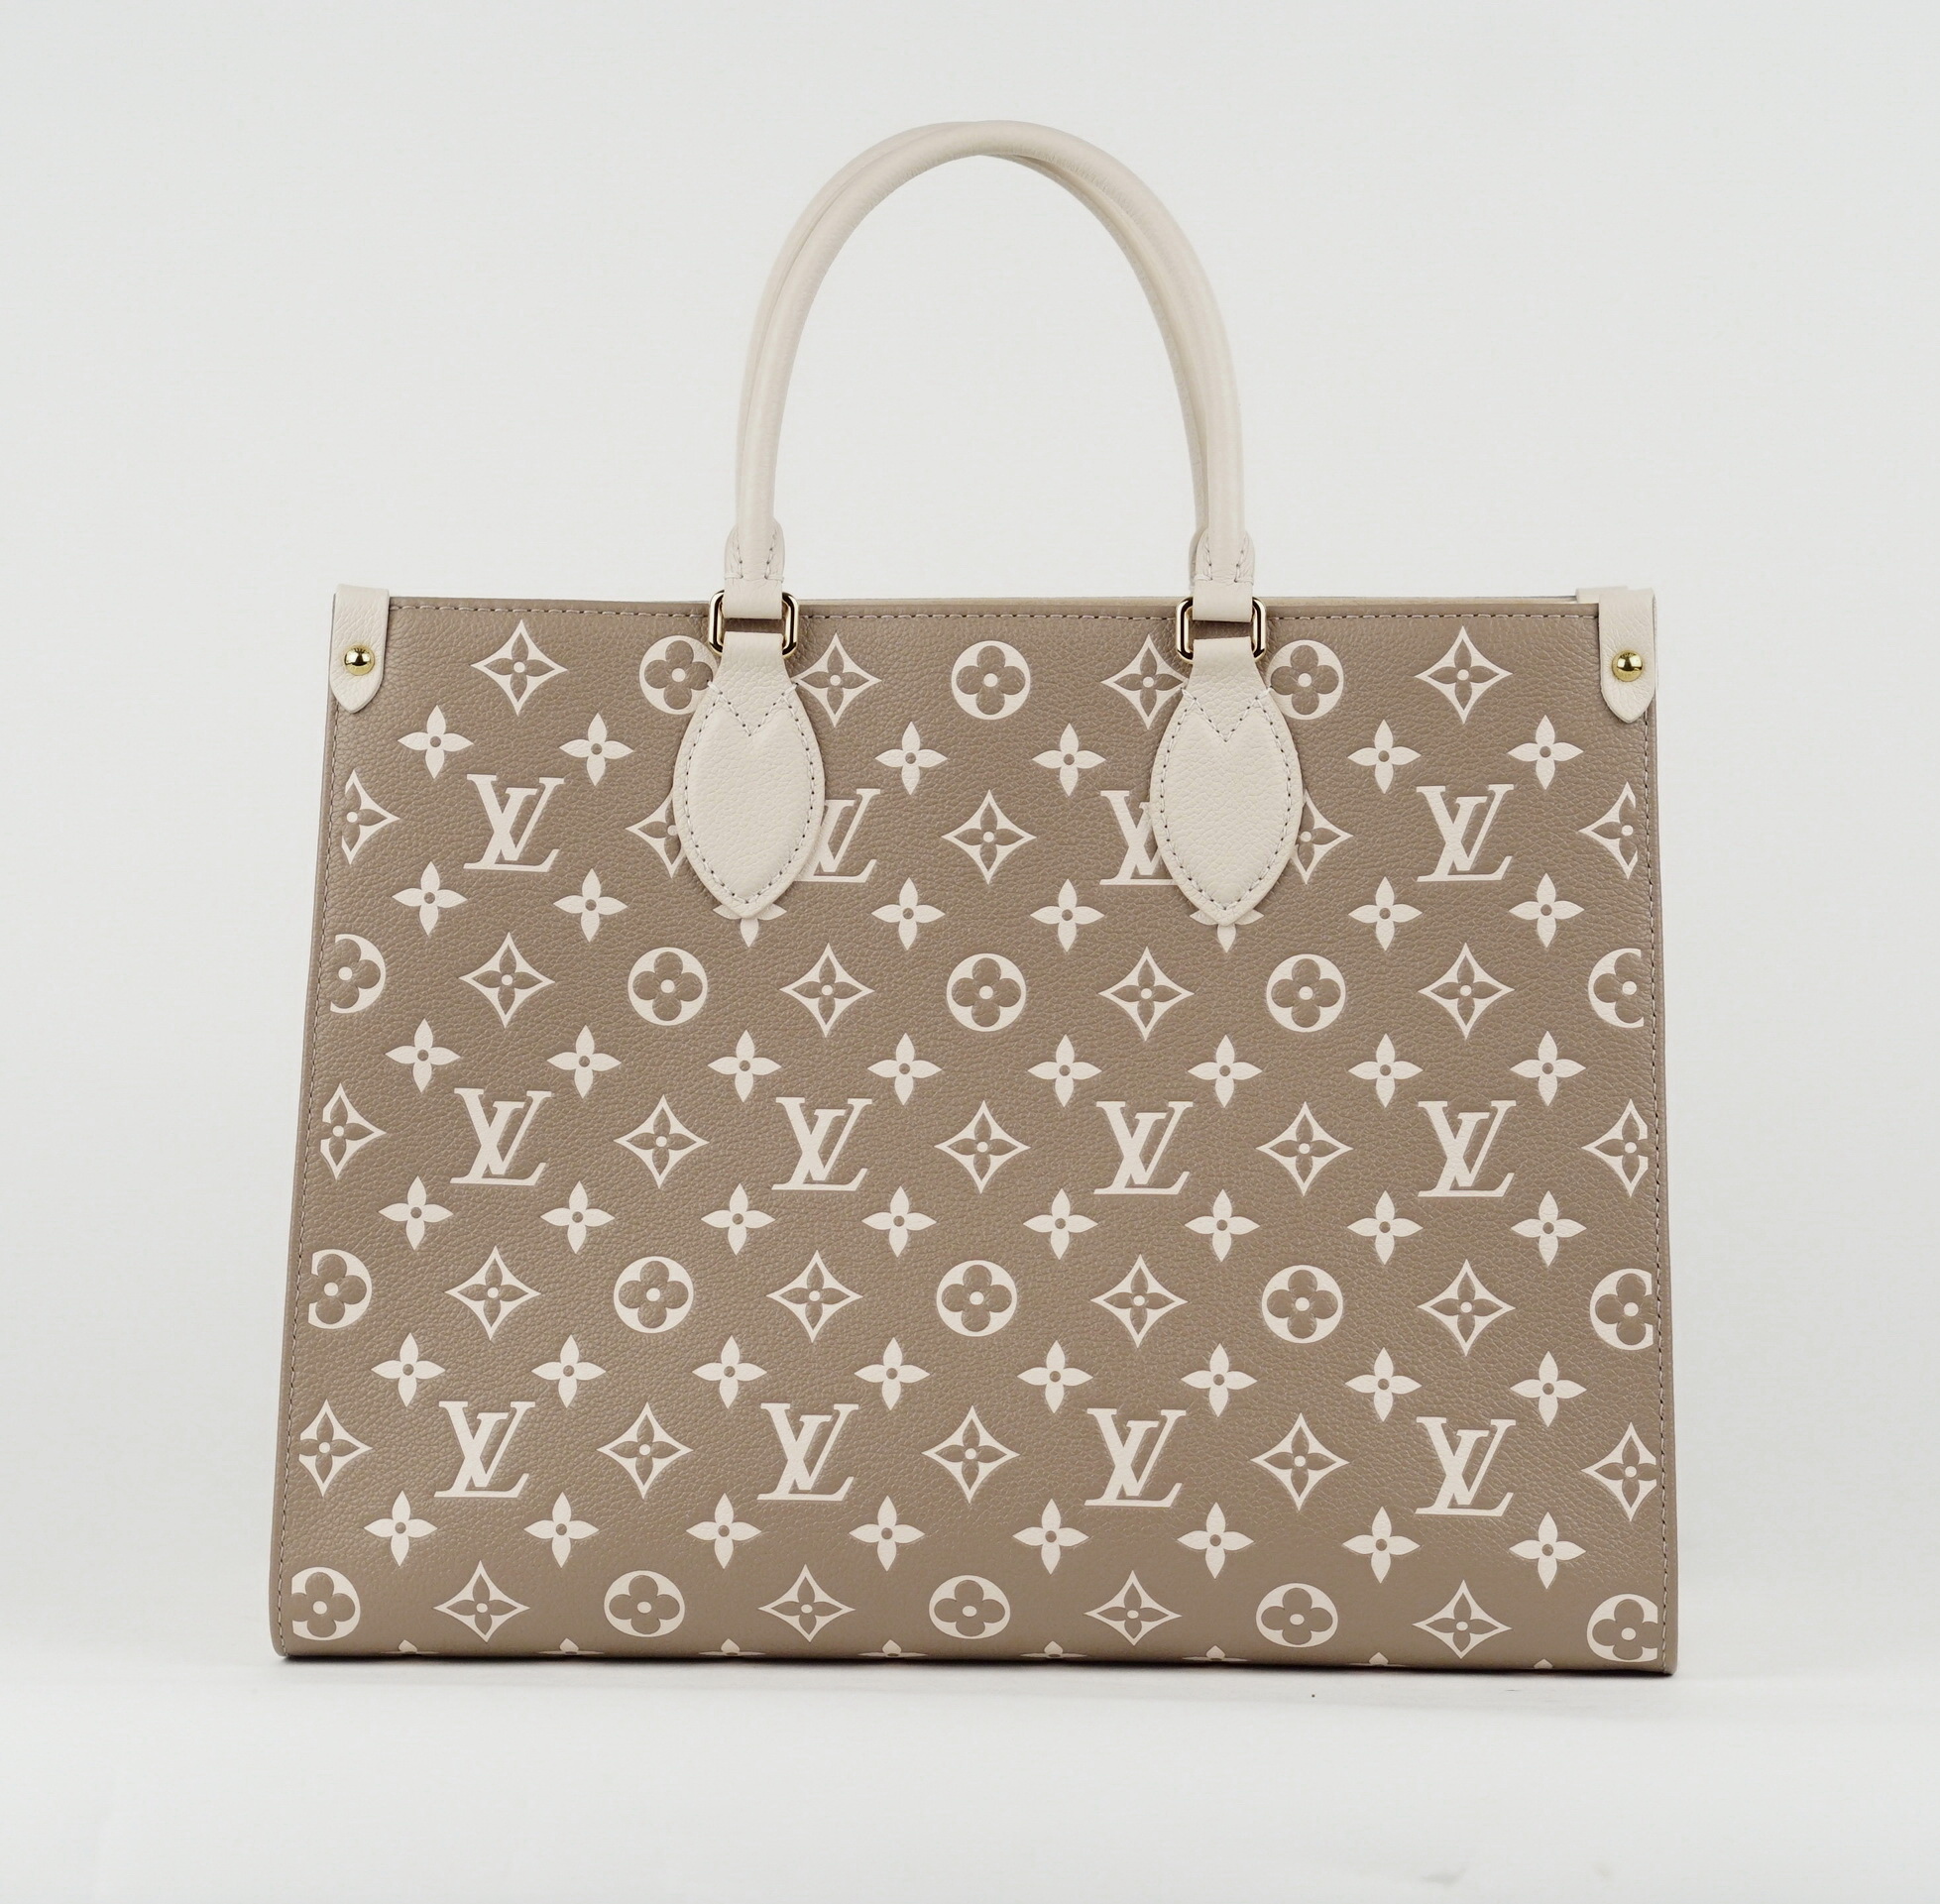 TOTE BAG - LOUIS VUITTON SPRING IN THE CITY EMPREINTE ONTHEGO MM